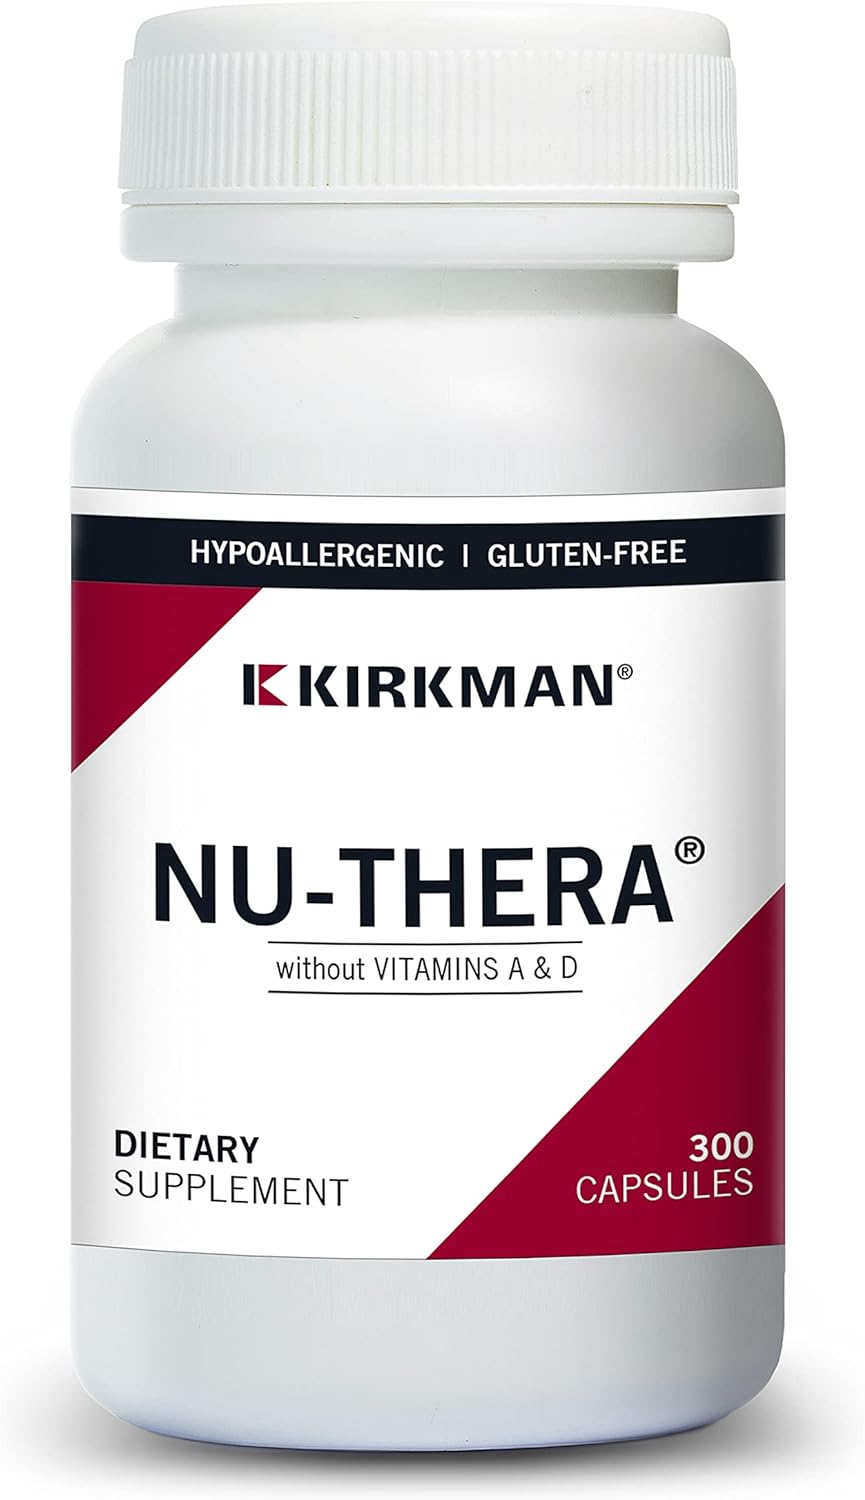 Kirkman Nu-Thera Without Vitamins A & D - Hypoallergenic || 300 Vegeta